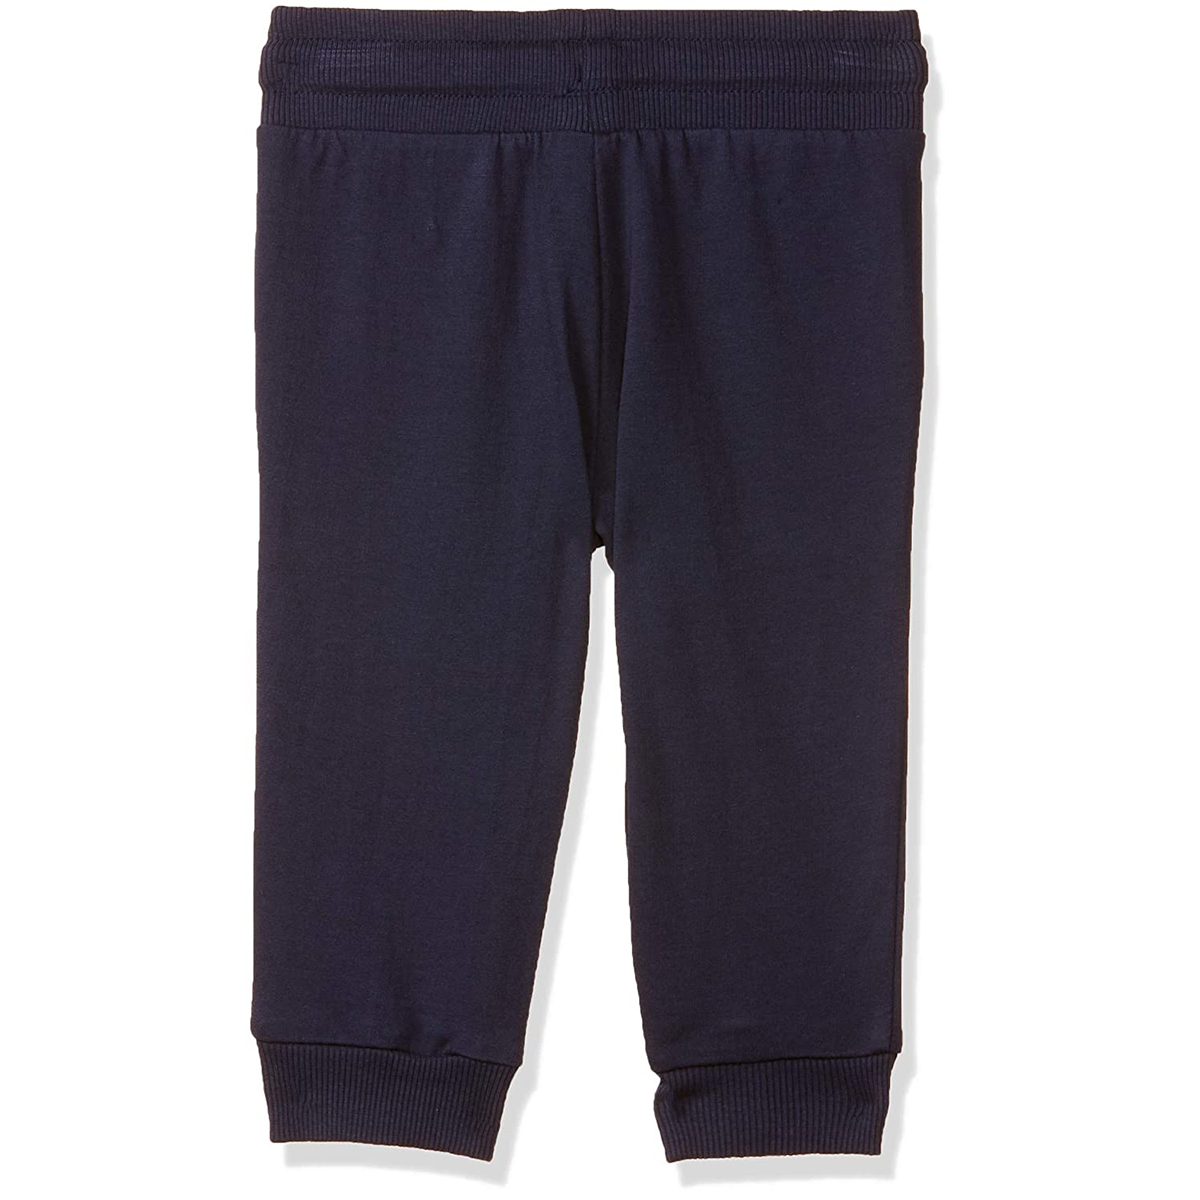 United Colors of Benetton Boy's Regular Fit Track Pants- Navy Blue